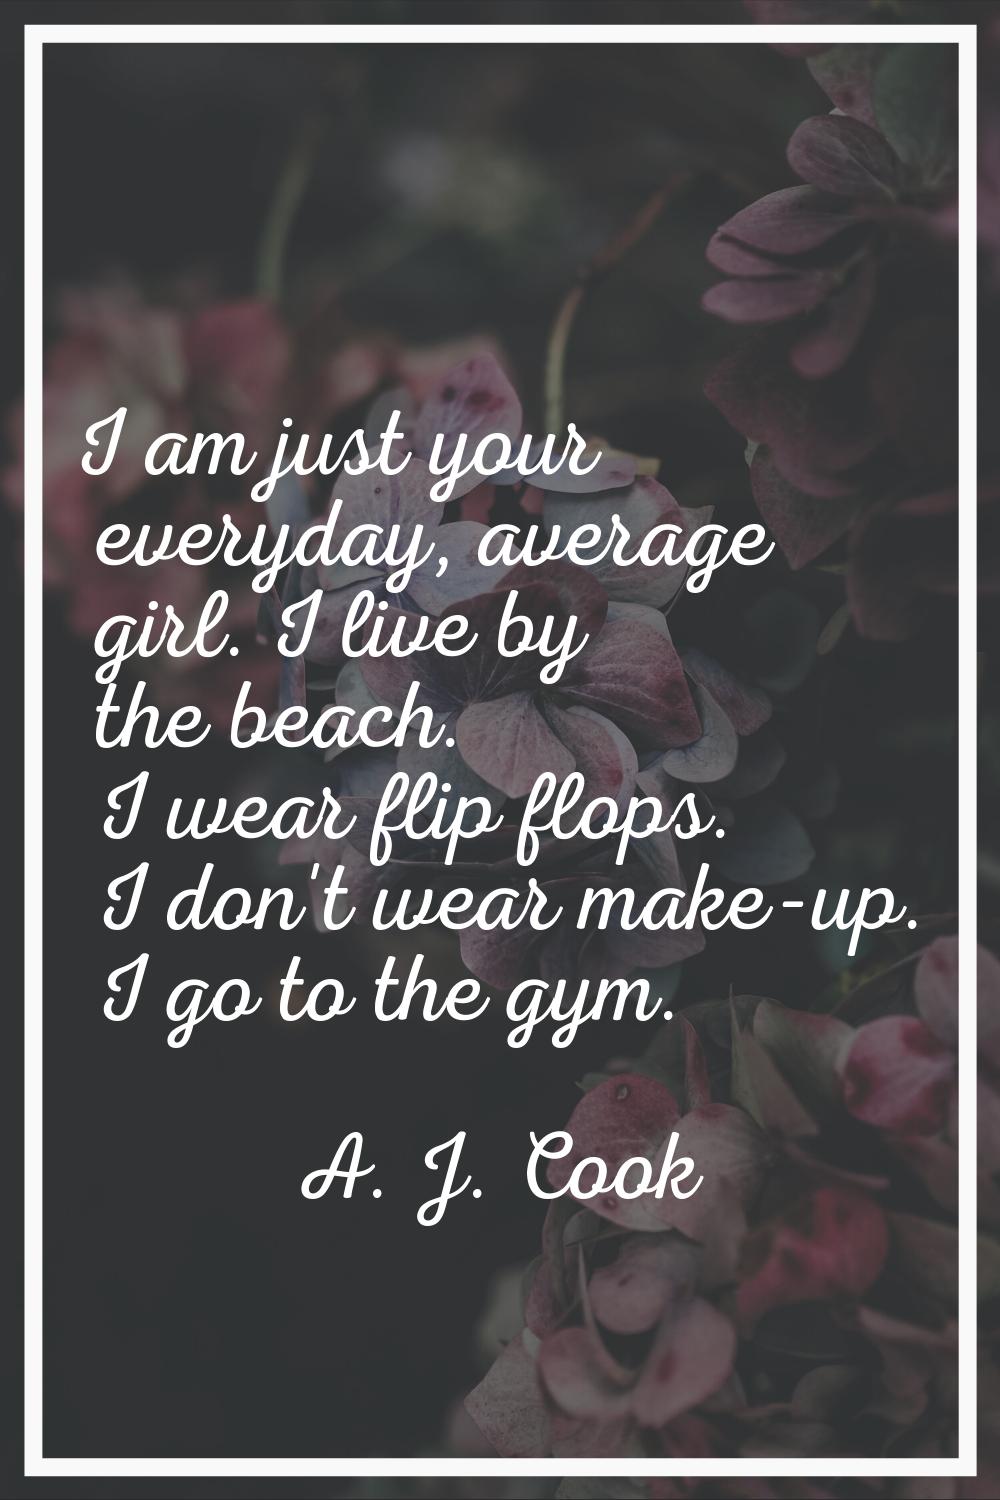 I am just your everyday, average girl. I live by the beach. I wear flip flops. I don't wear make-up